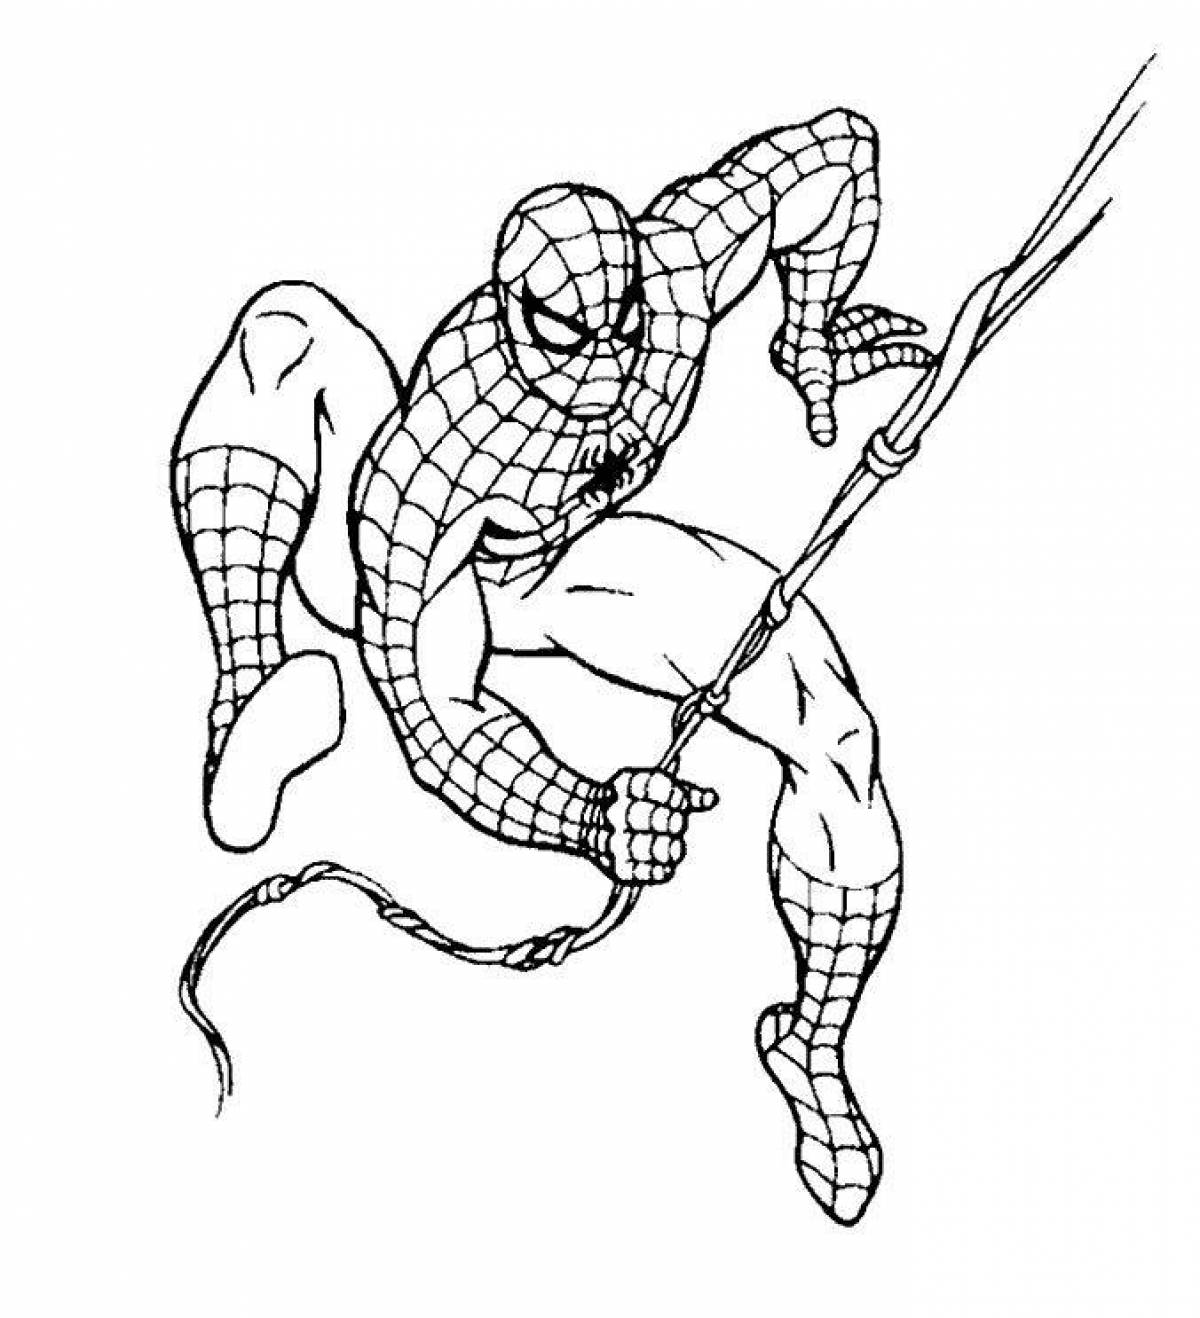 Energetic Spiderman coloring pages for boys